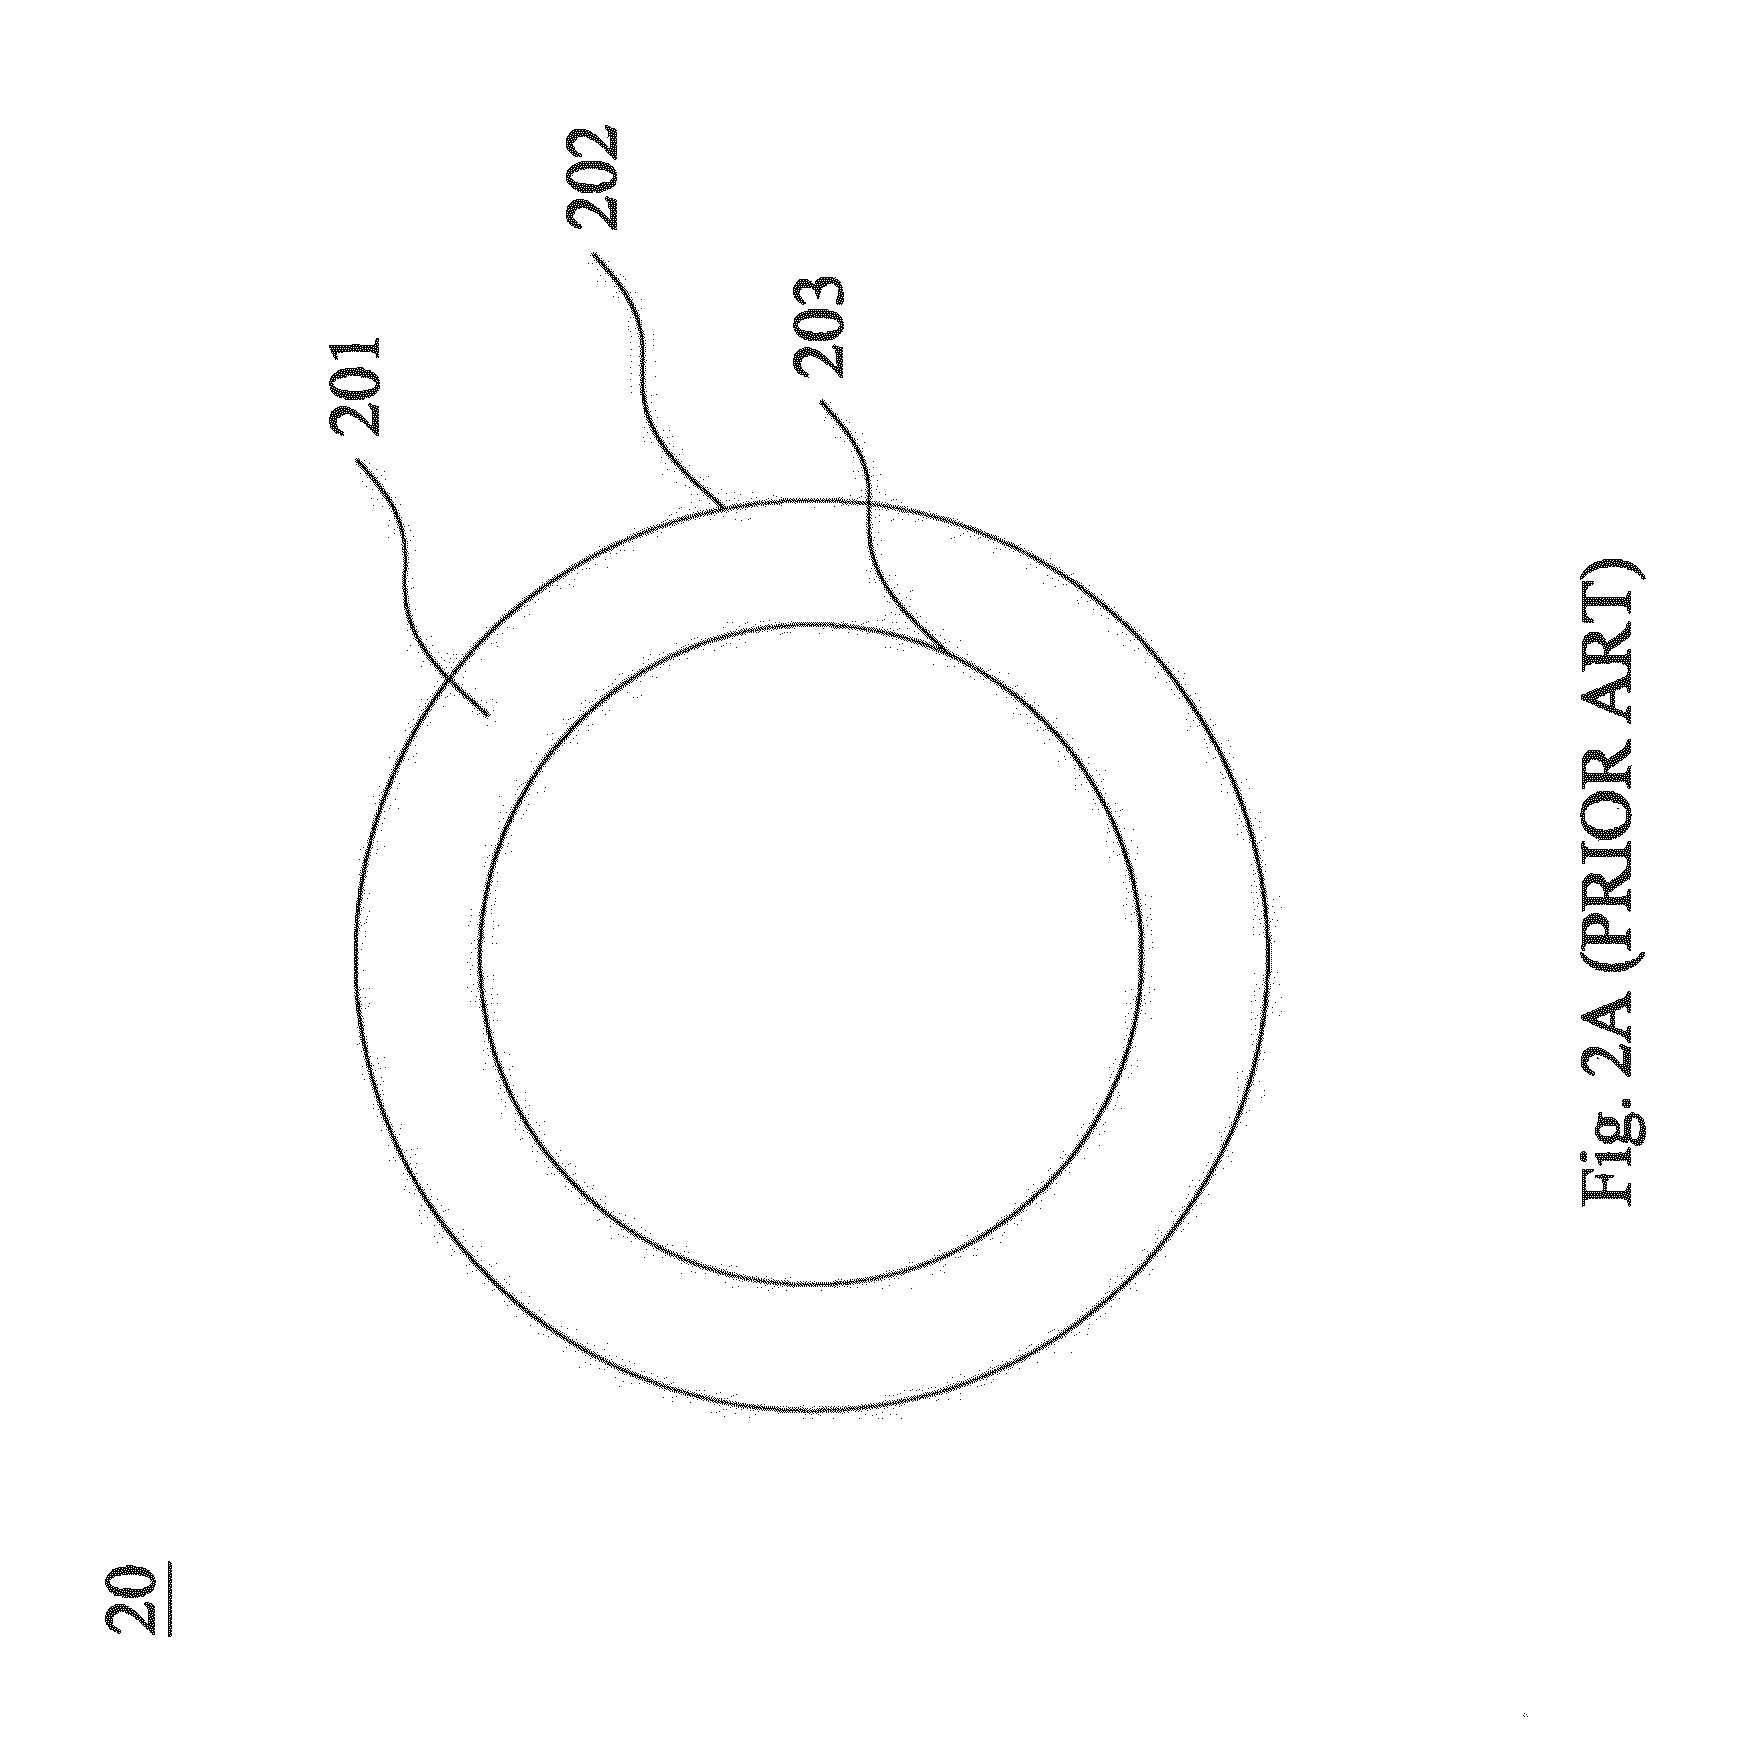 Lens assembly and baffle thereof